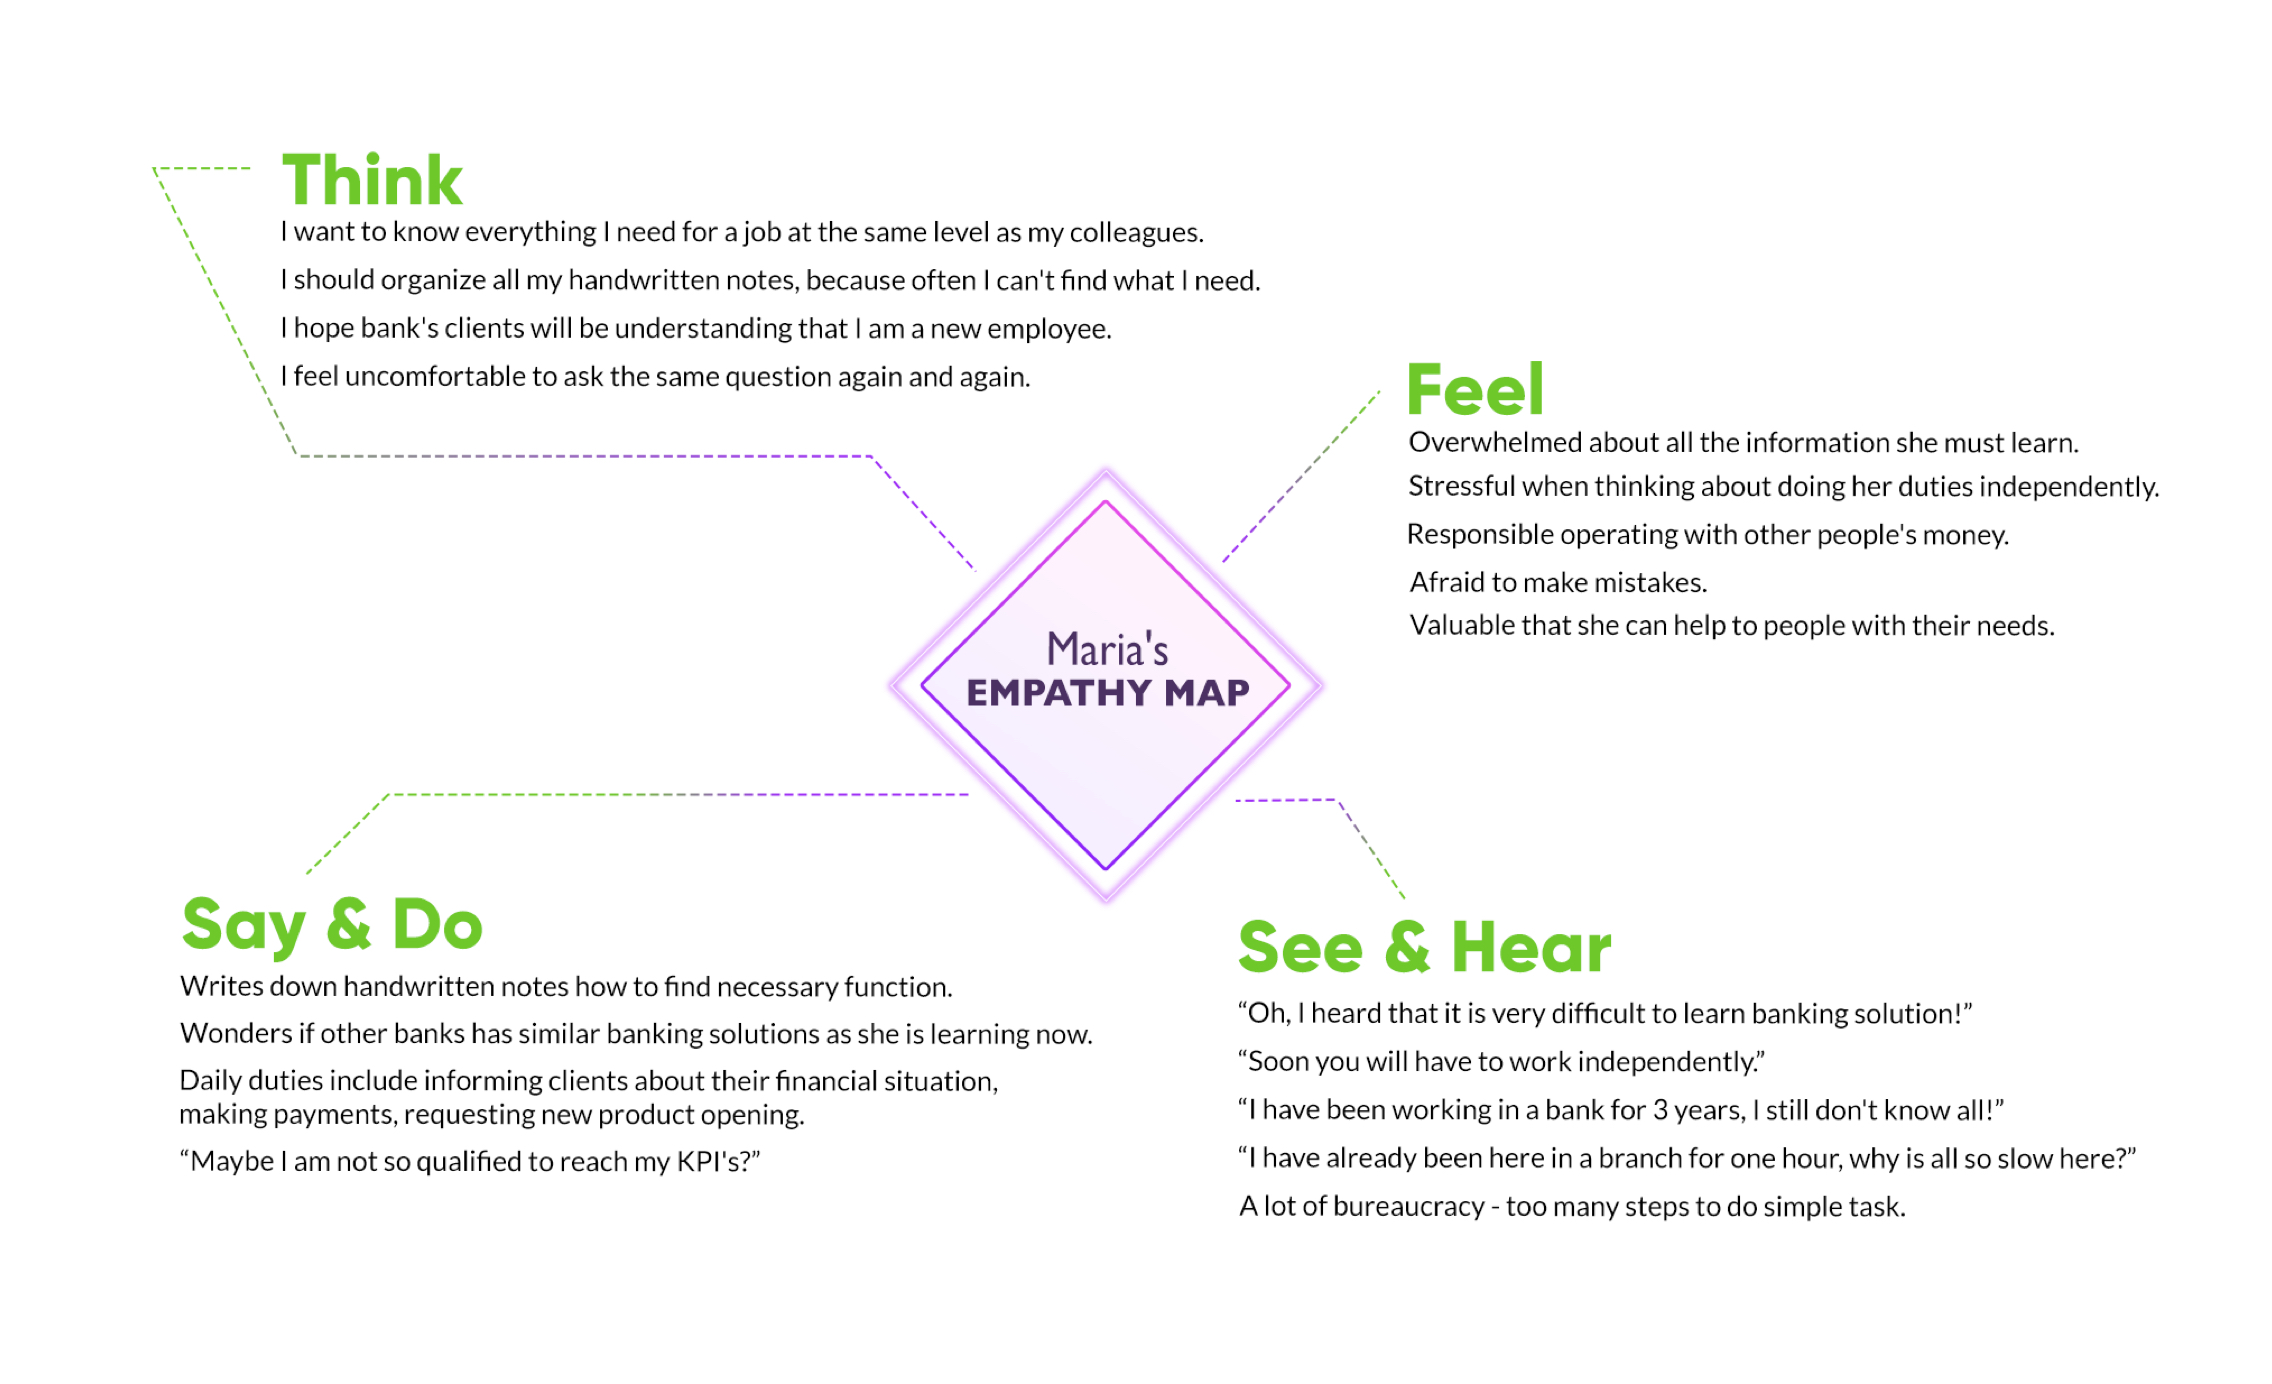 5 drivers of successful digital transformation in banking - empathy map